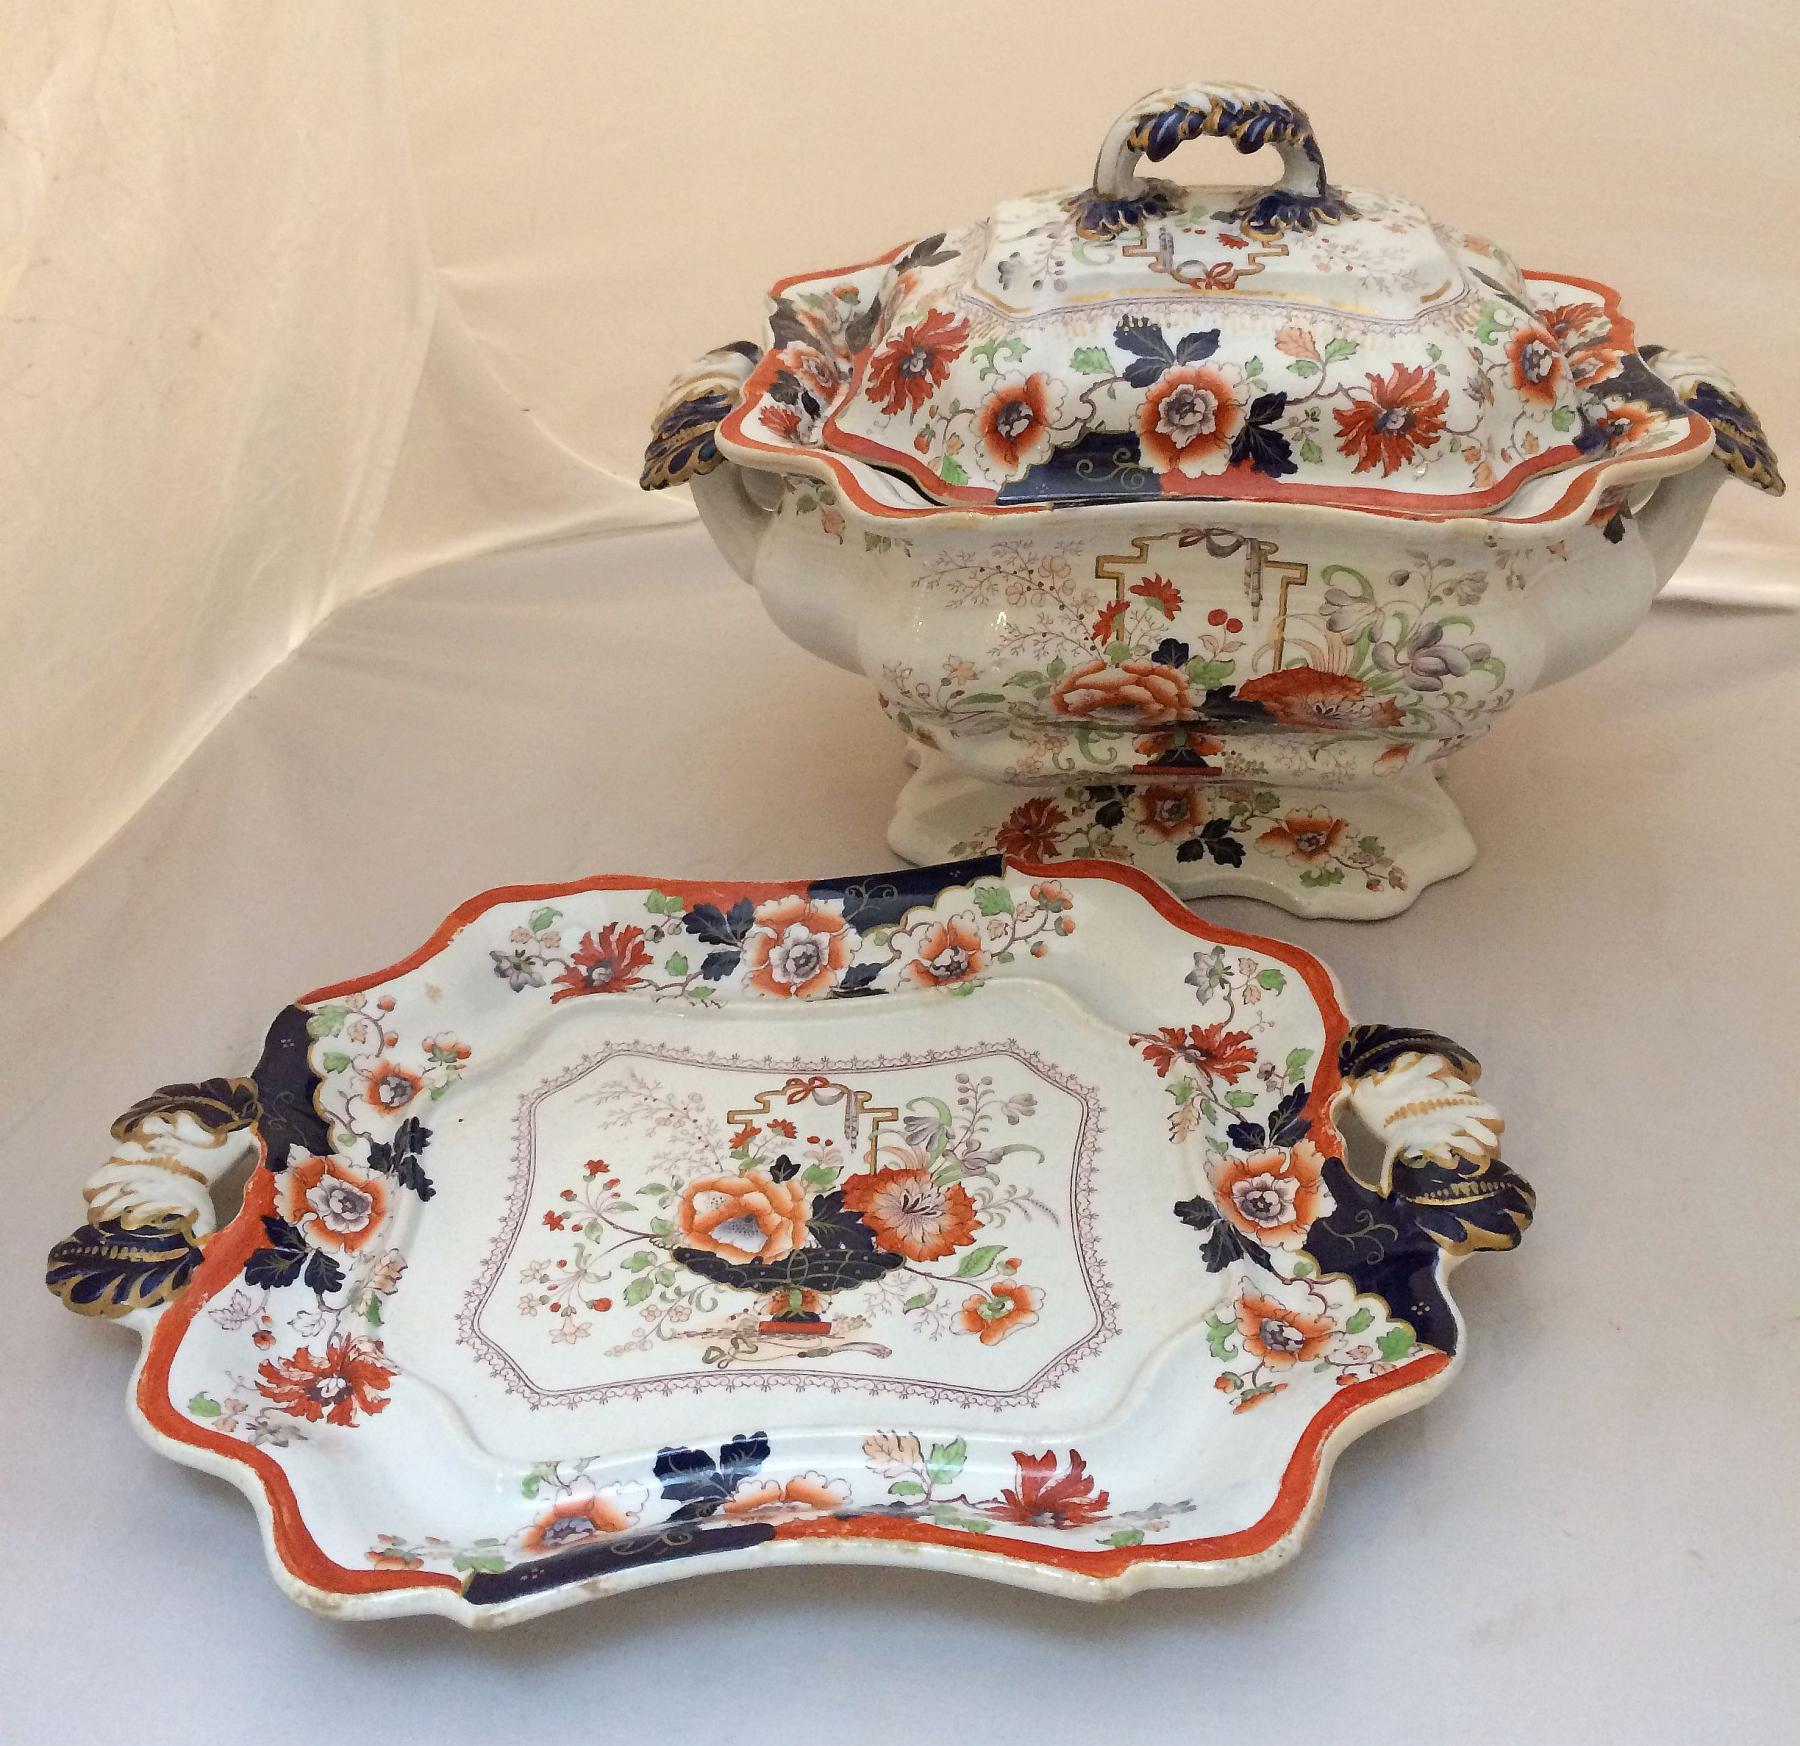 t3433_hicks_meigh_and_johnson_tureen_28